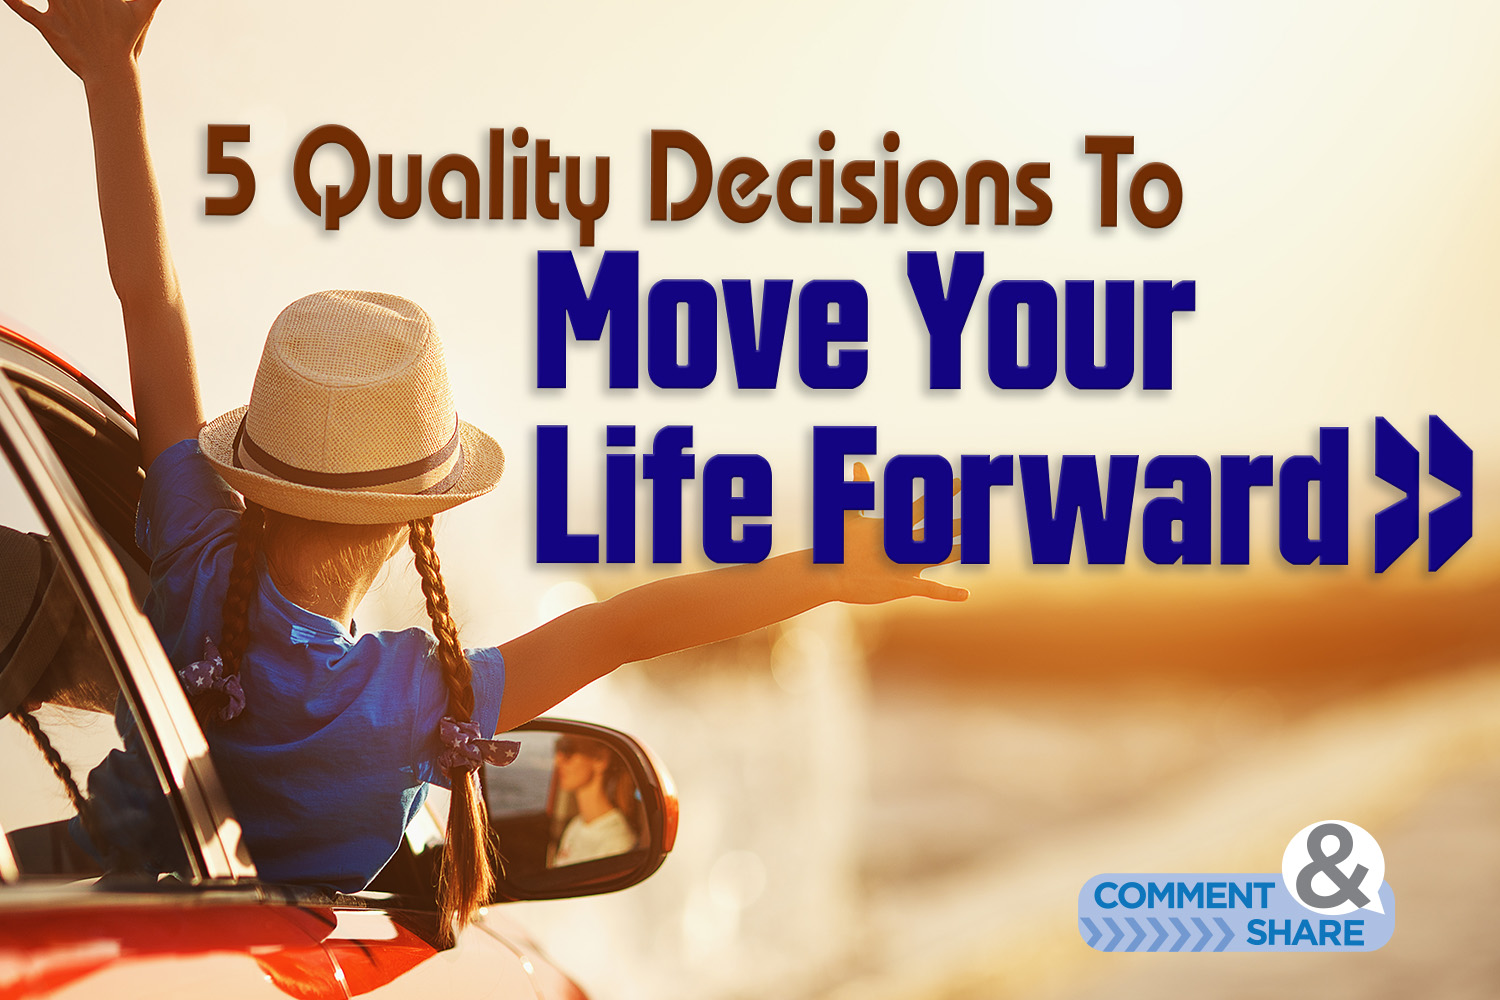 5 Quality Decisions To Move Your Life Forward